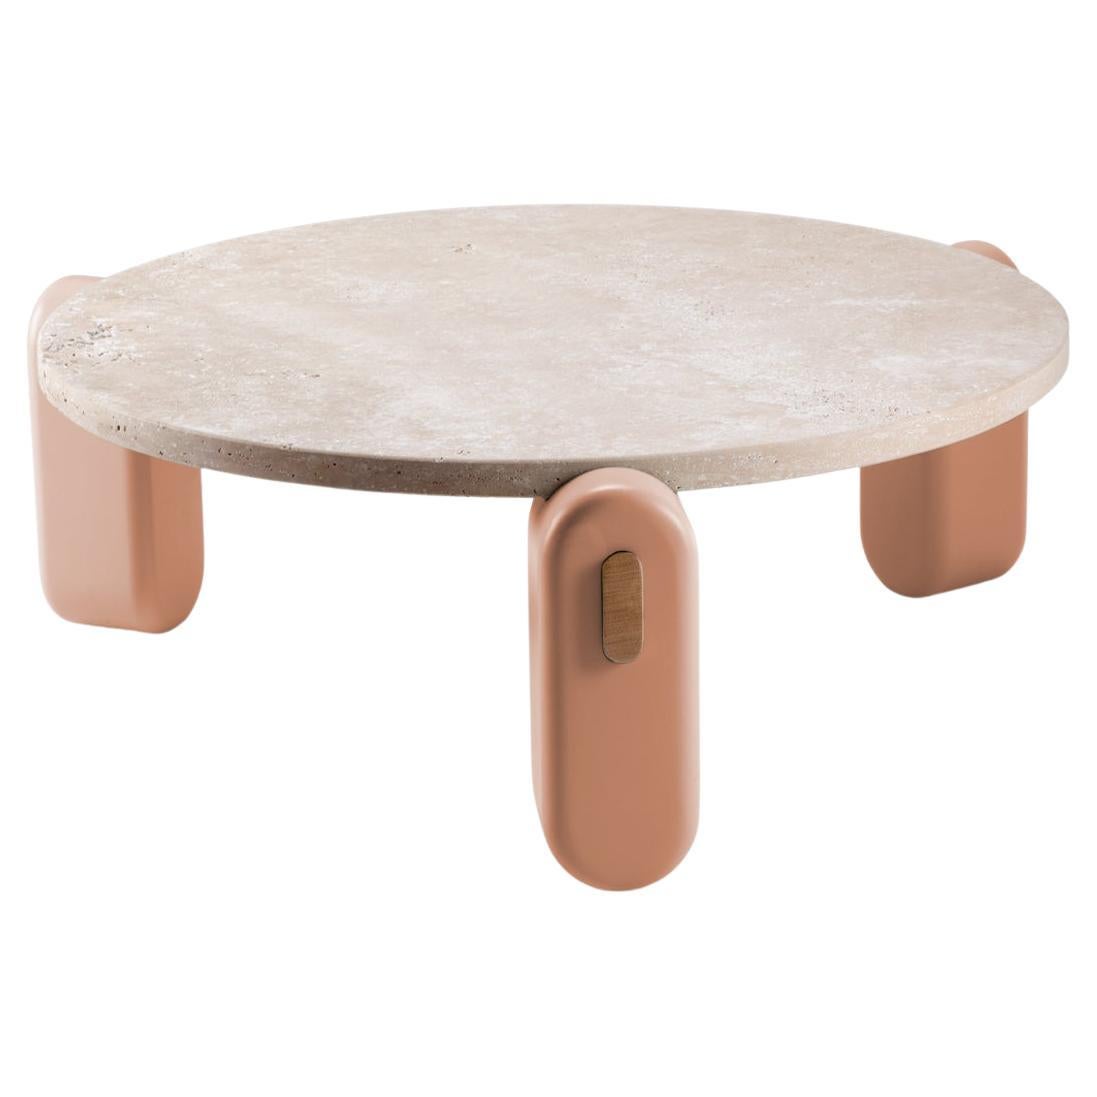 Mona Center Table with Travertine Top, Powder Lacquered Feet and Wood Structure For Sale